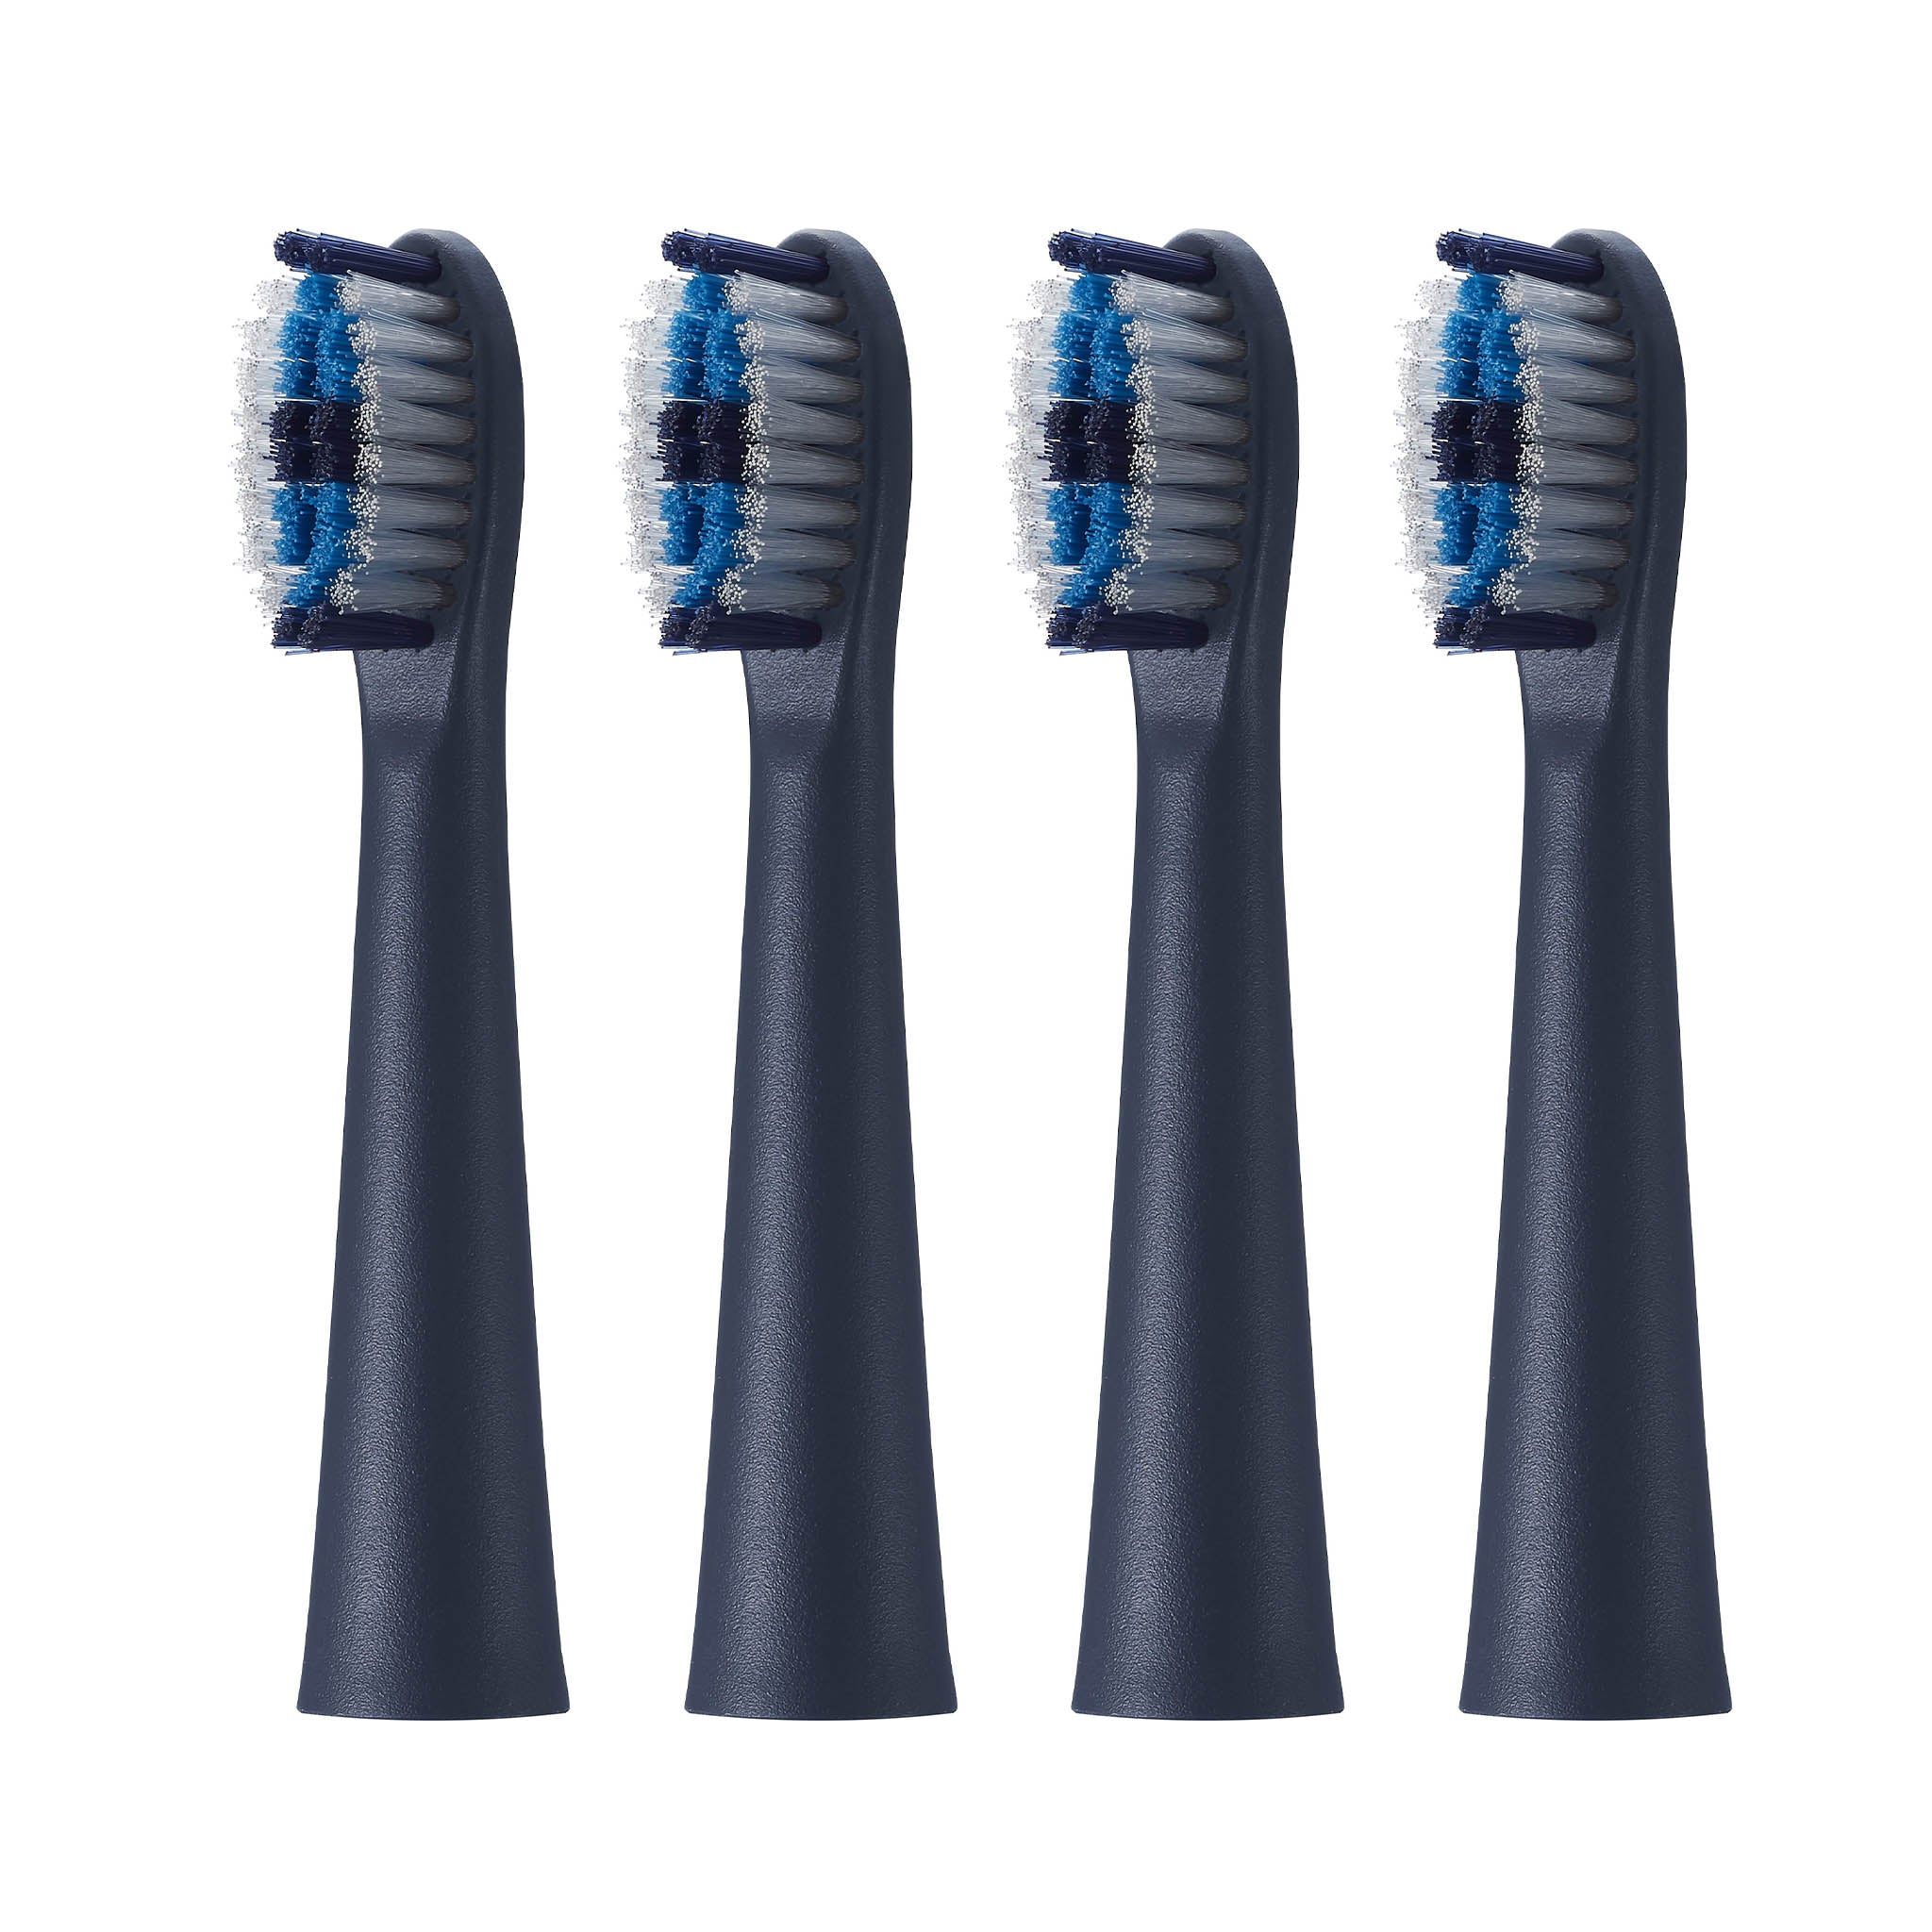 Multi-fit Replacement Toothbrushes (4 count)